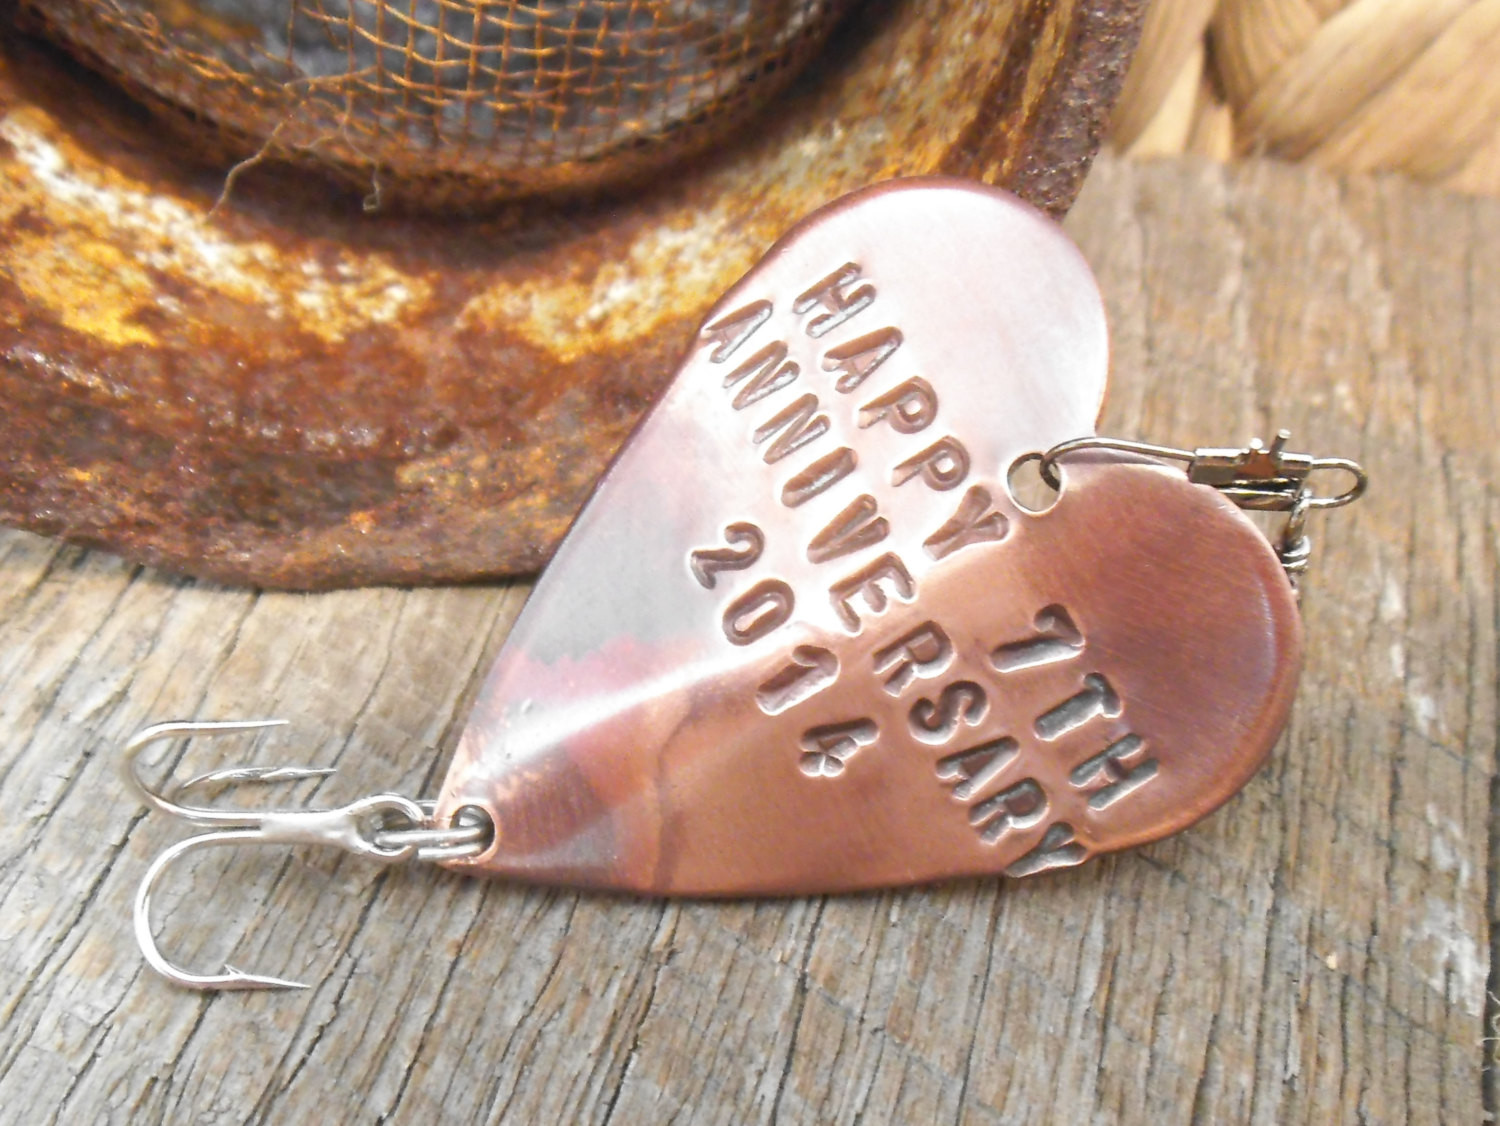 7 Year Anniversary Copper Gift Ideas
 Seventh Anniversary 7th Wedding Anniversary Lucky 7 Copper